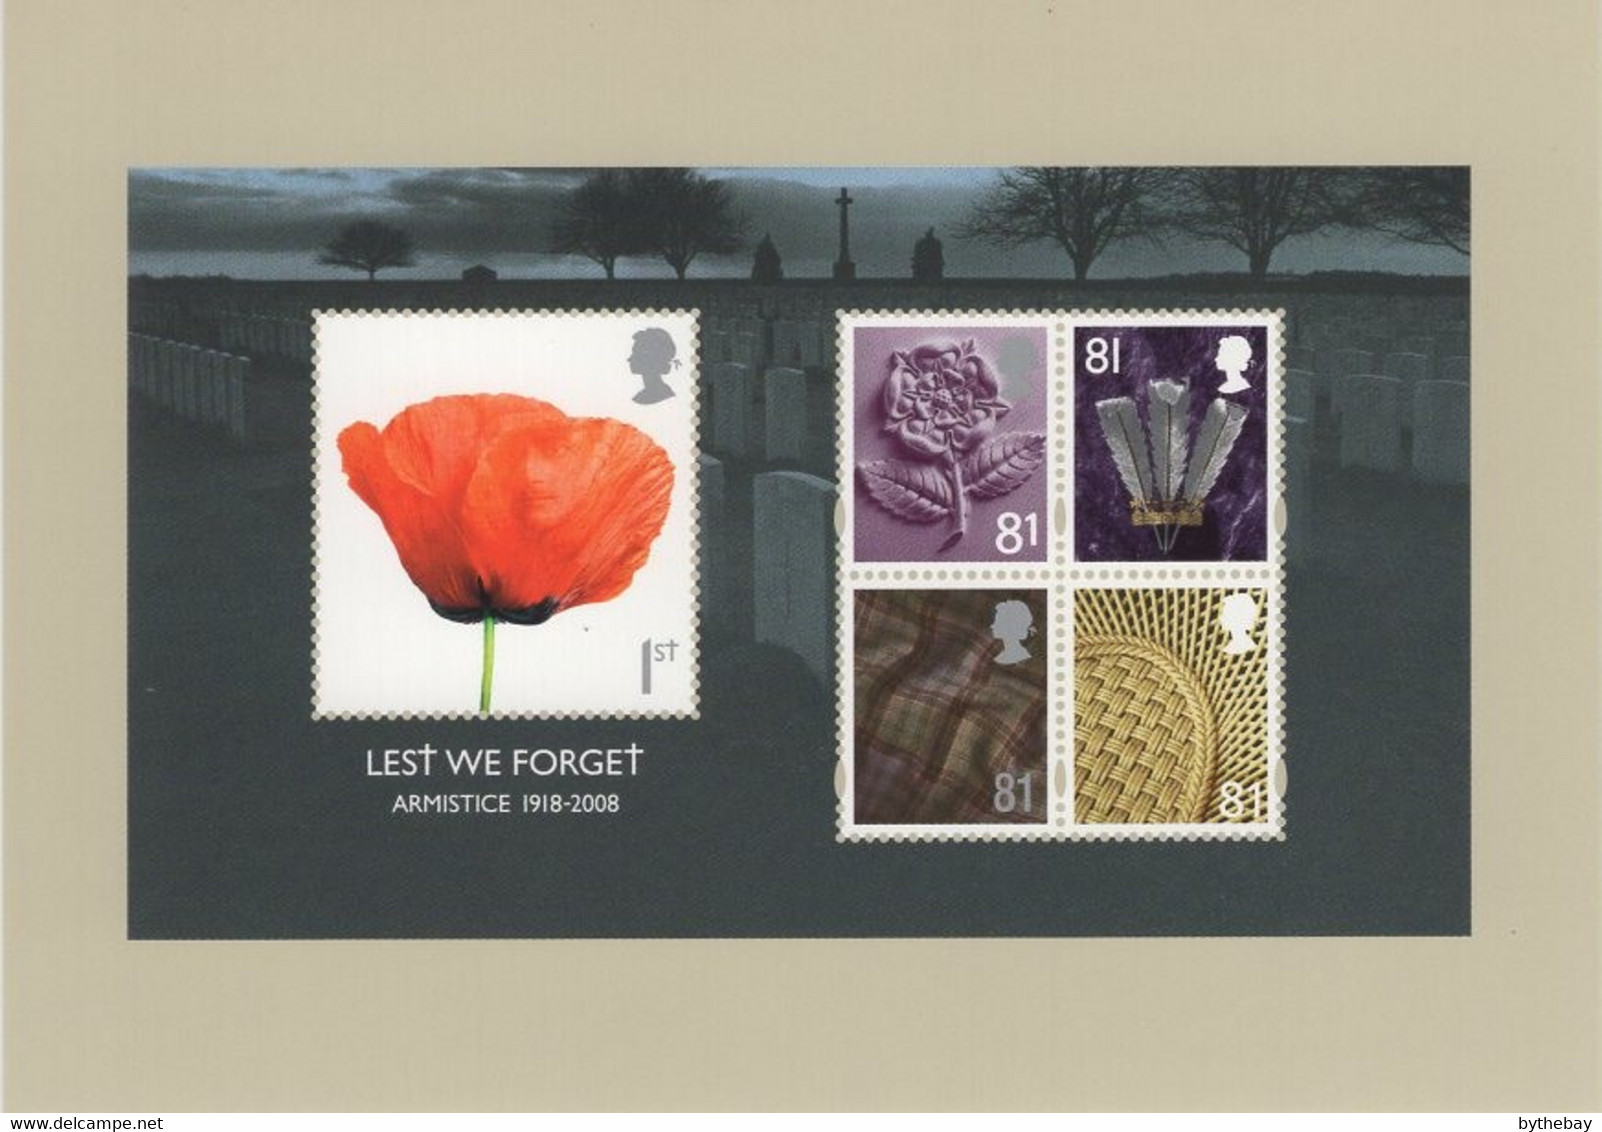 Great Britain 2008 PHQ Card Sc 2614a Armistice 1918-2008 Lest We Forget - PHQ Cards